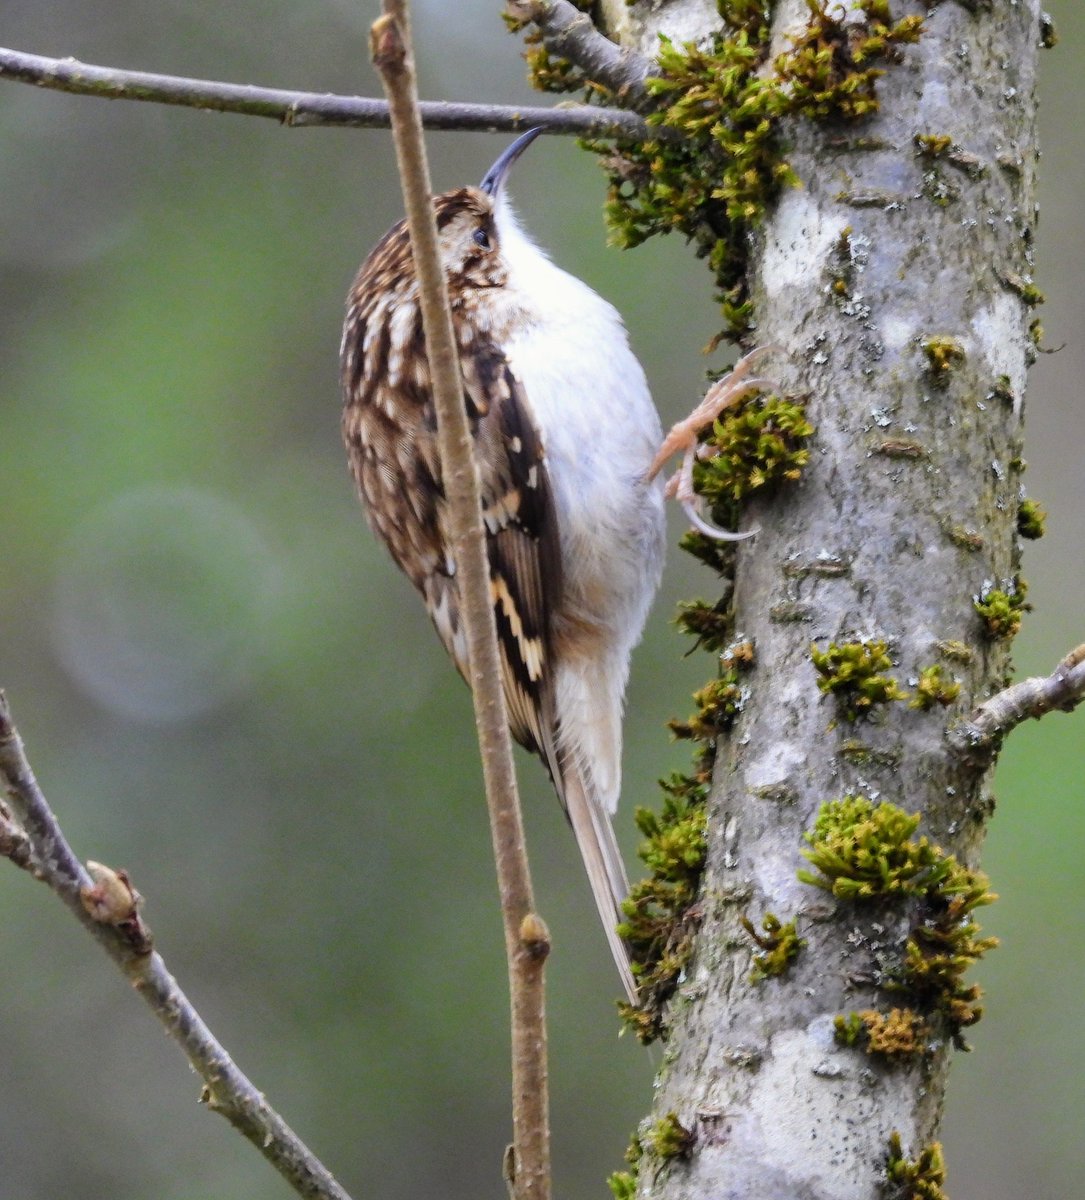 Tree creeper doing its thing